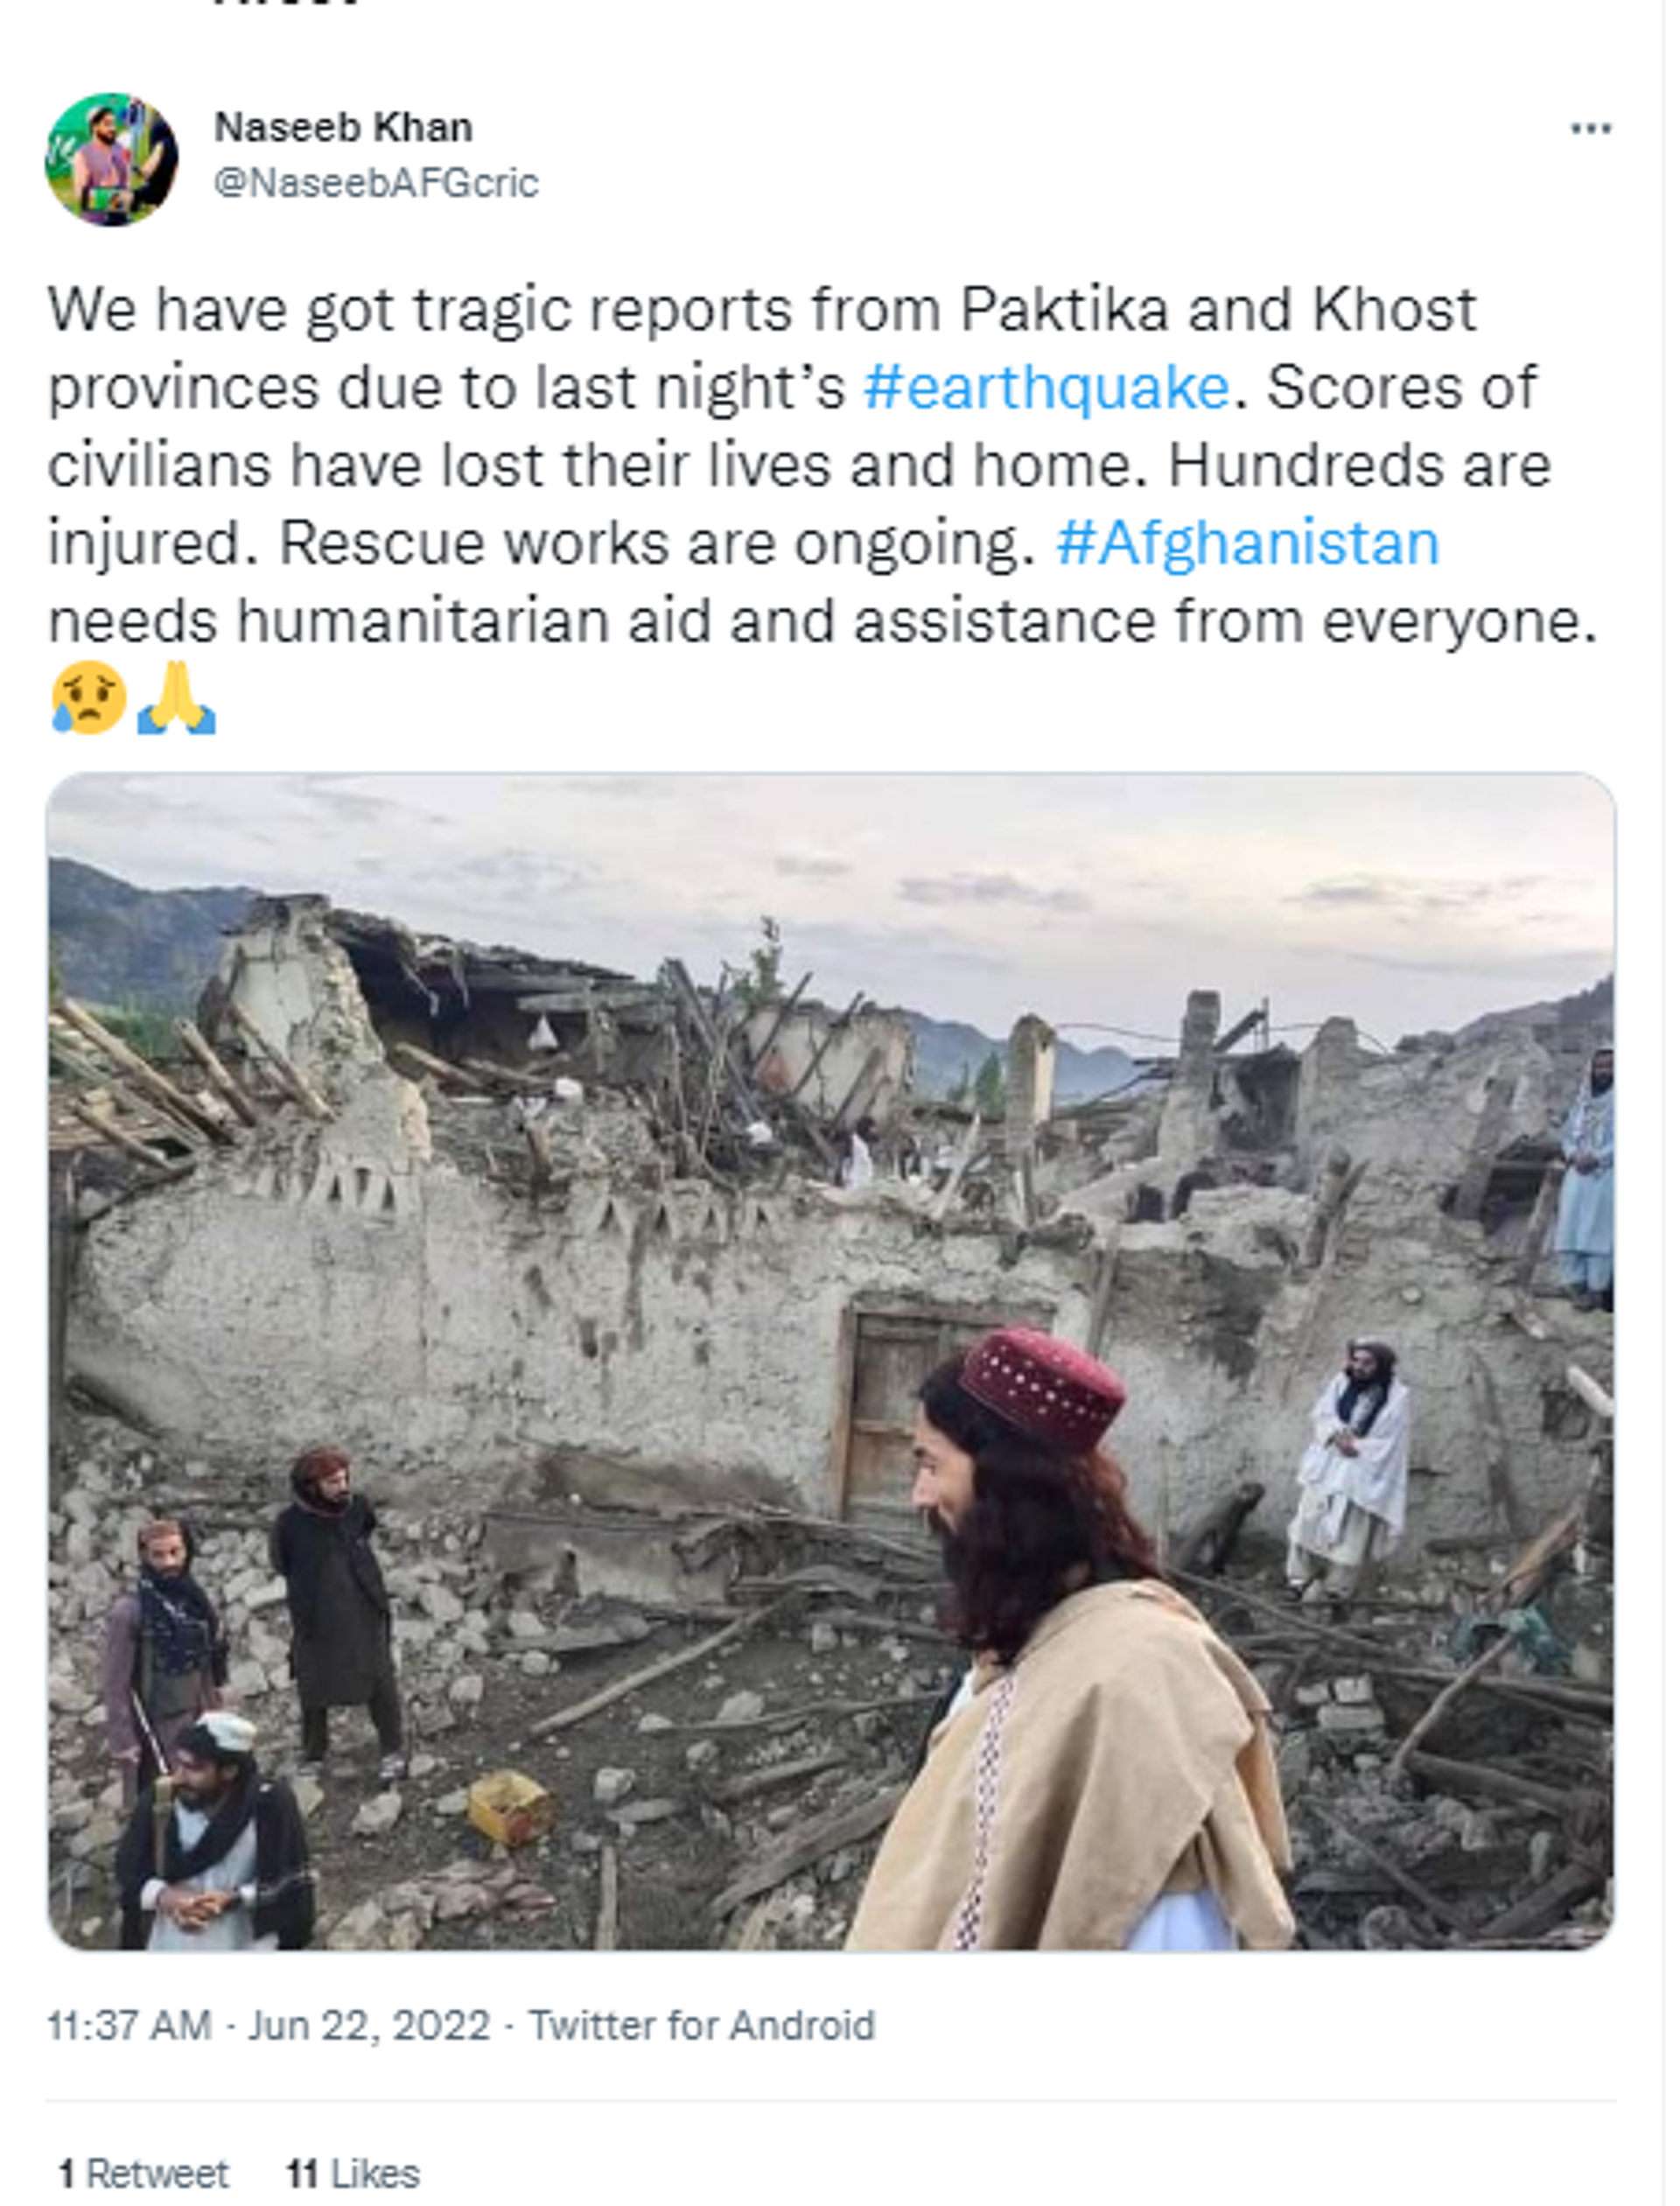 An earthquake of magnitude 6.1 killed at least 280 people in Afghanistan early on Wednesday - Sputnik International, 1920, 22.06.2022